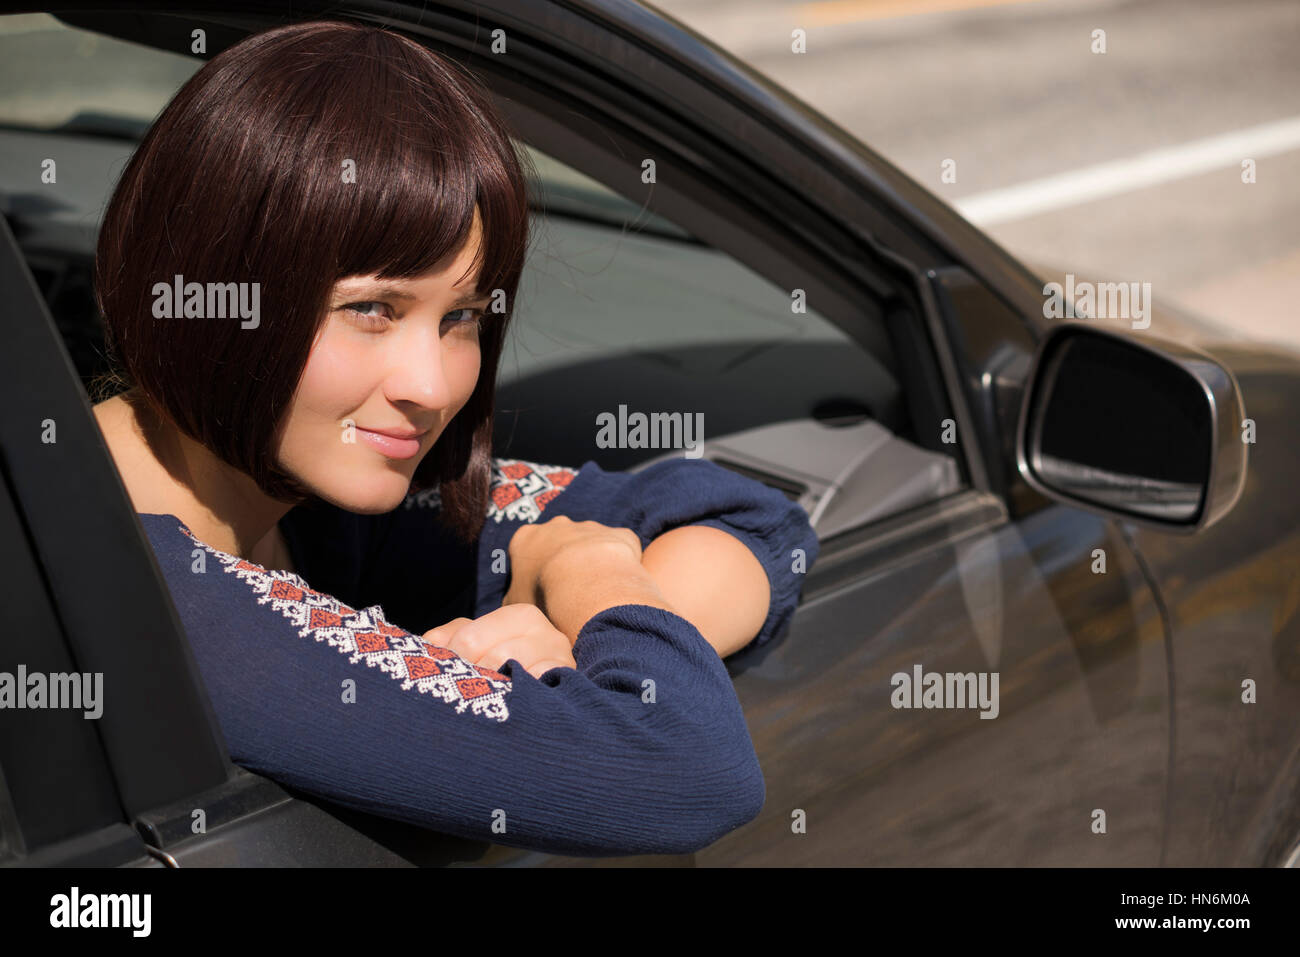 Young woman with burgundy hair looking out of right passanger window of ...